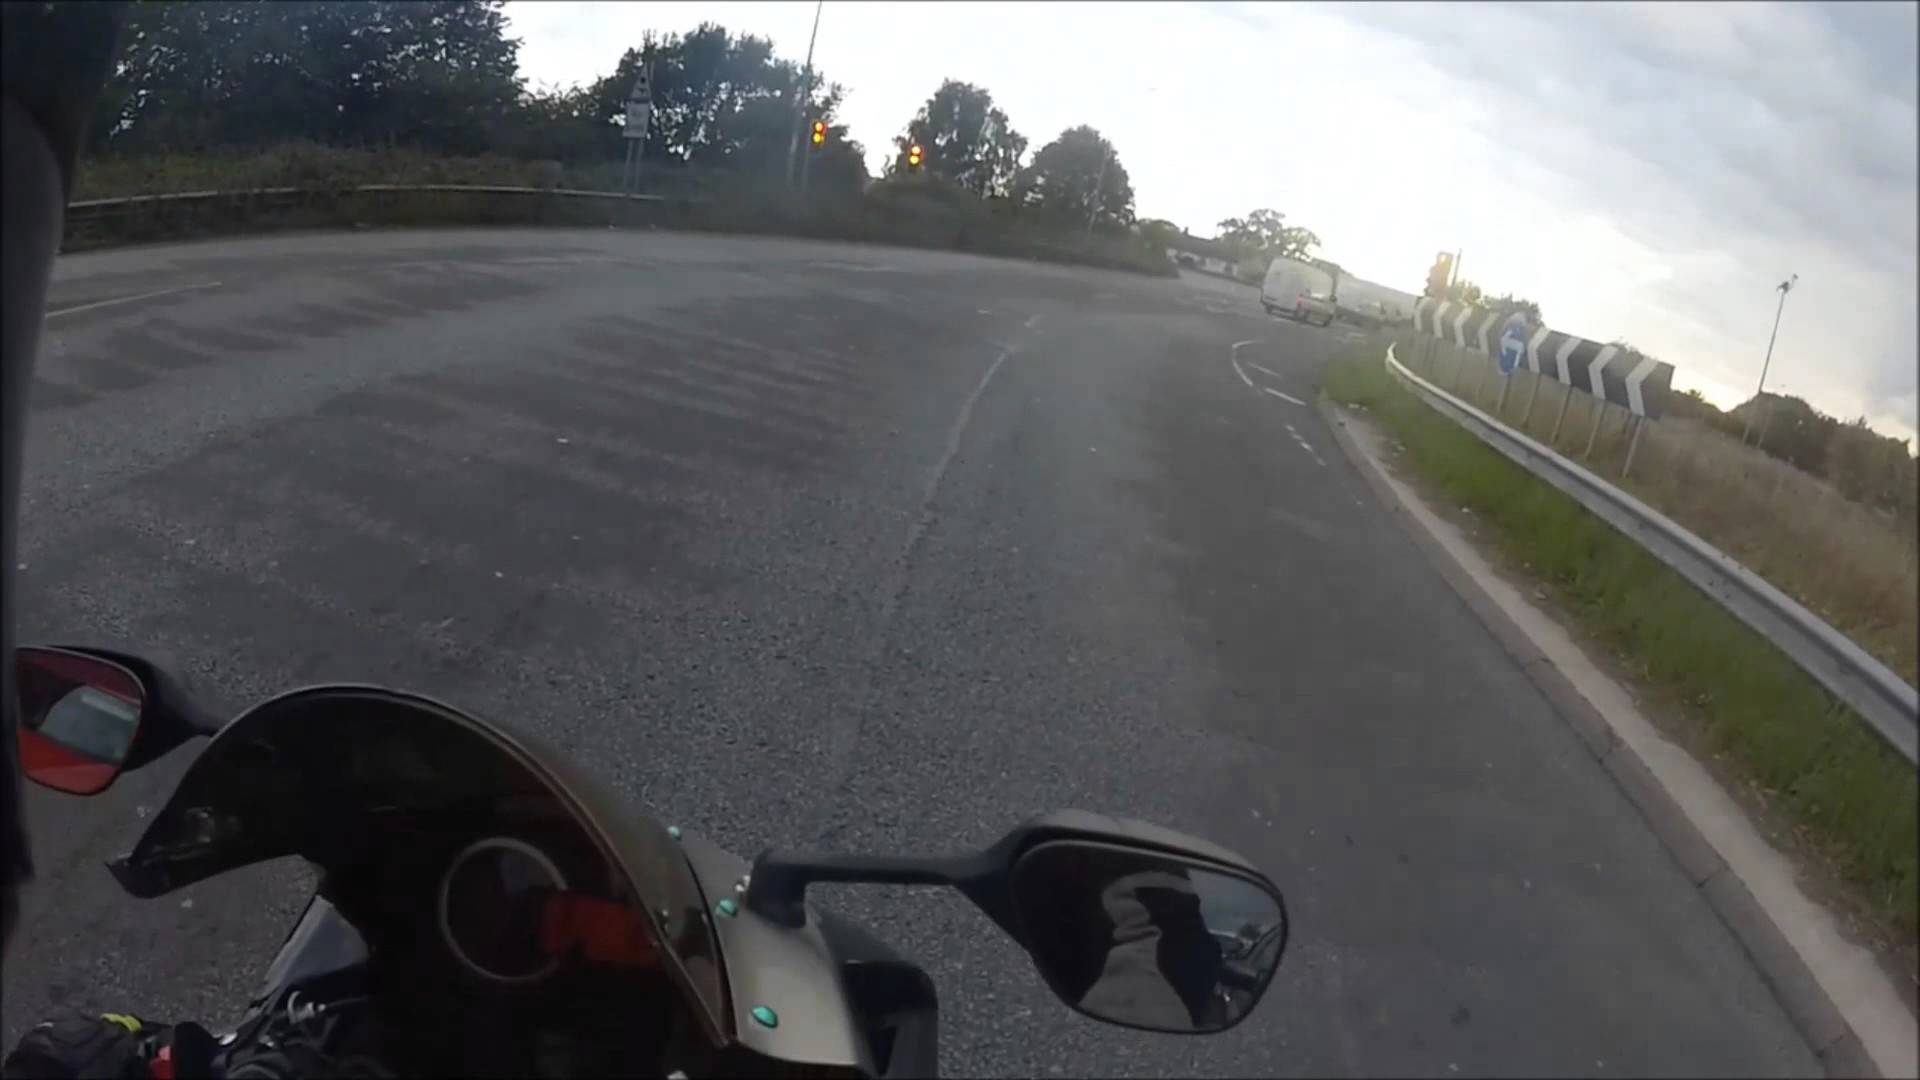 Typical Evo Driver Cuts off Motorcycle - Instant Karma!